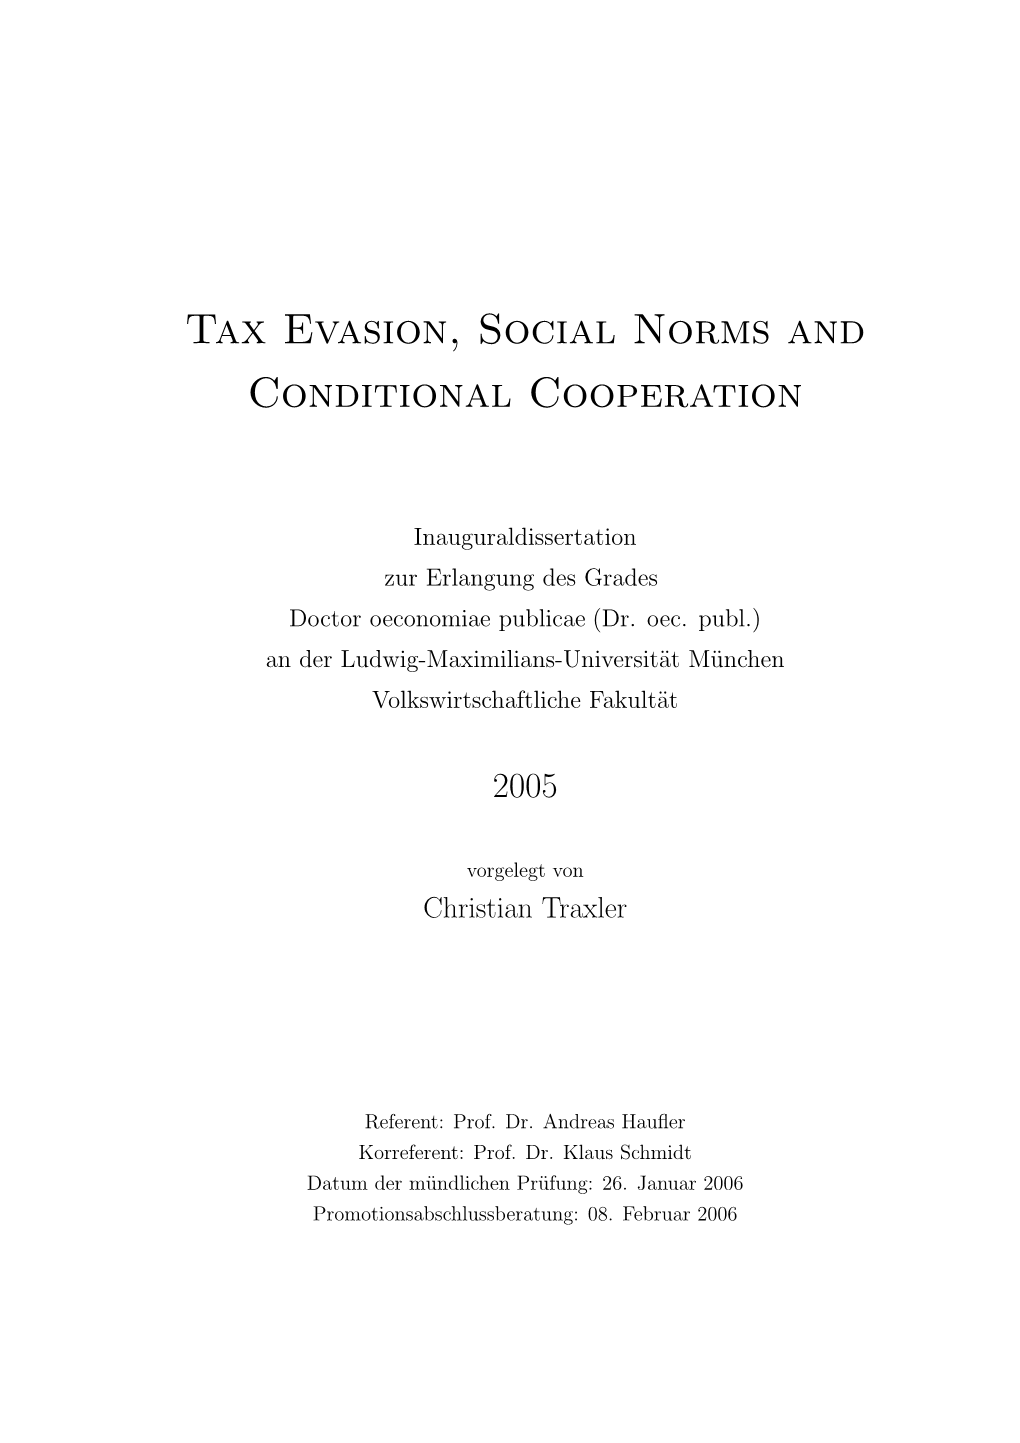 Tax Evasion, Social Norms and Conditional Cooperation